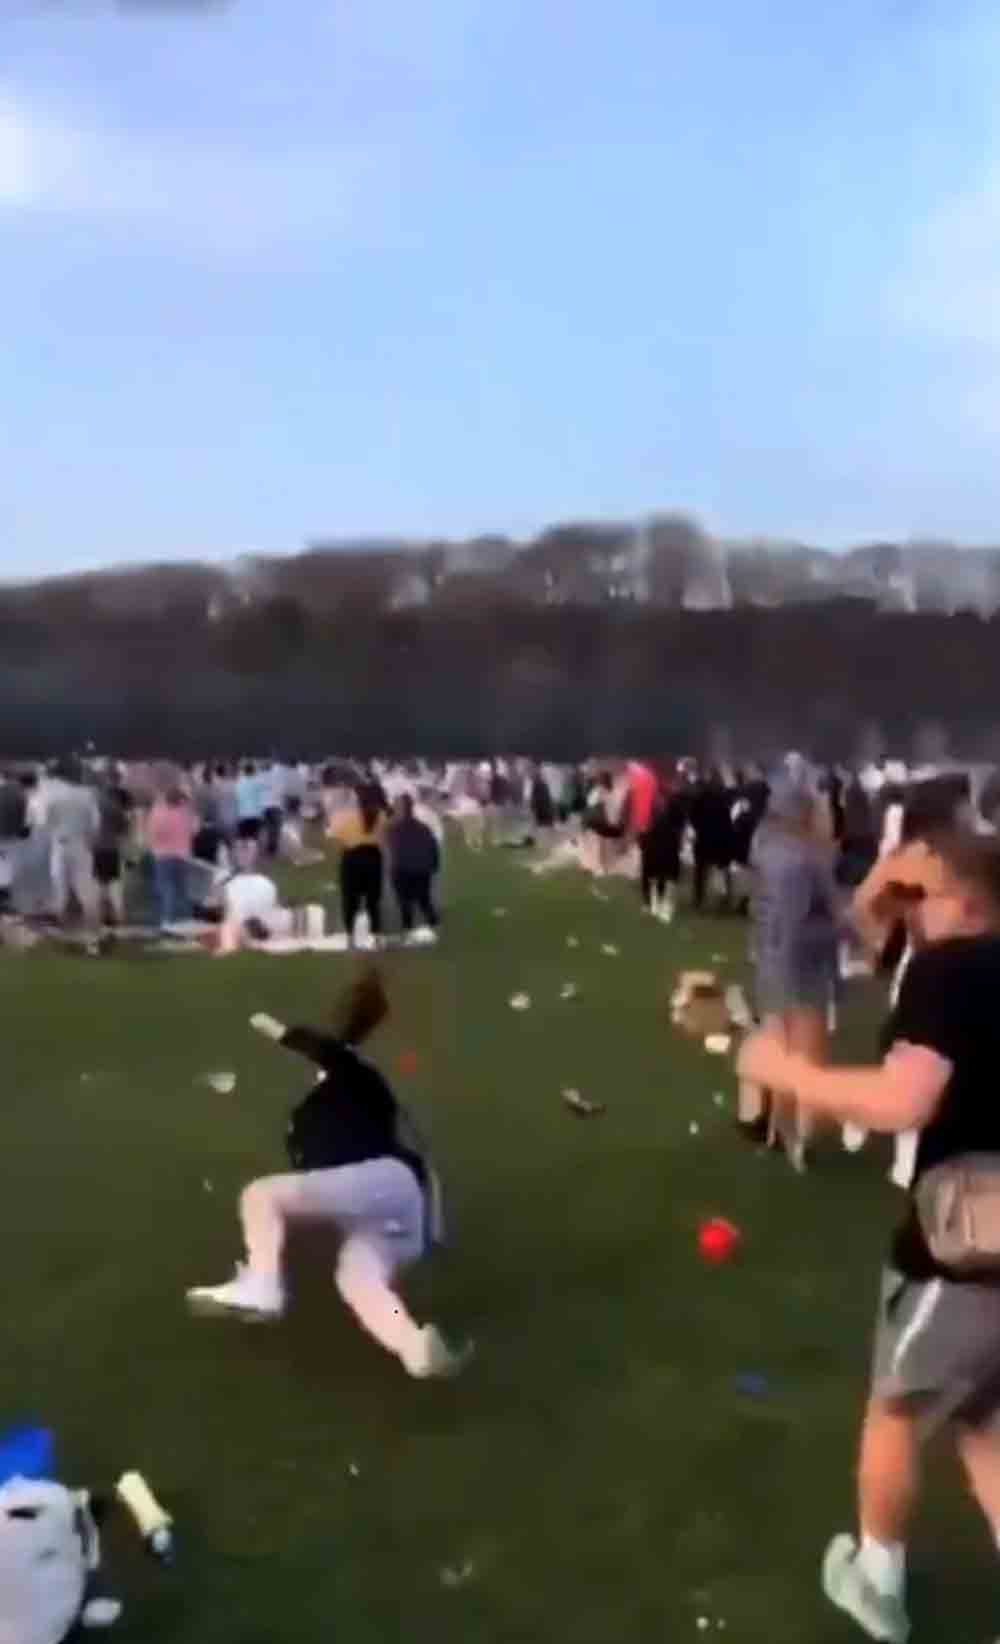 Shocking video shows woman fall to the ground after being pelted with football - Viral Video News